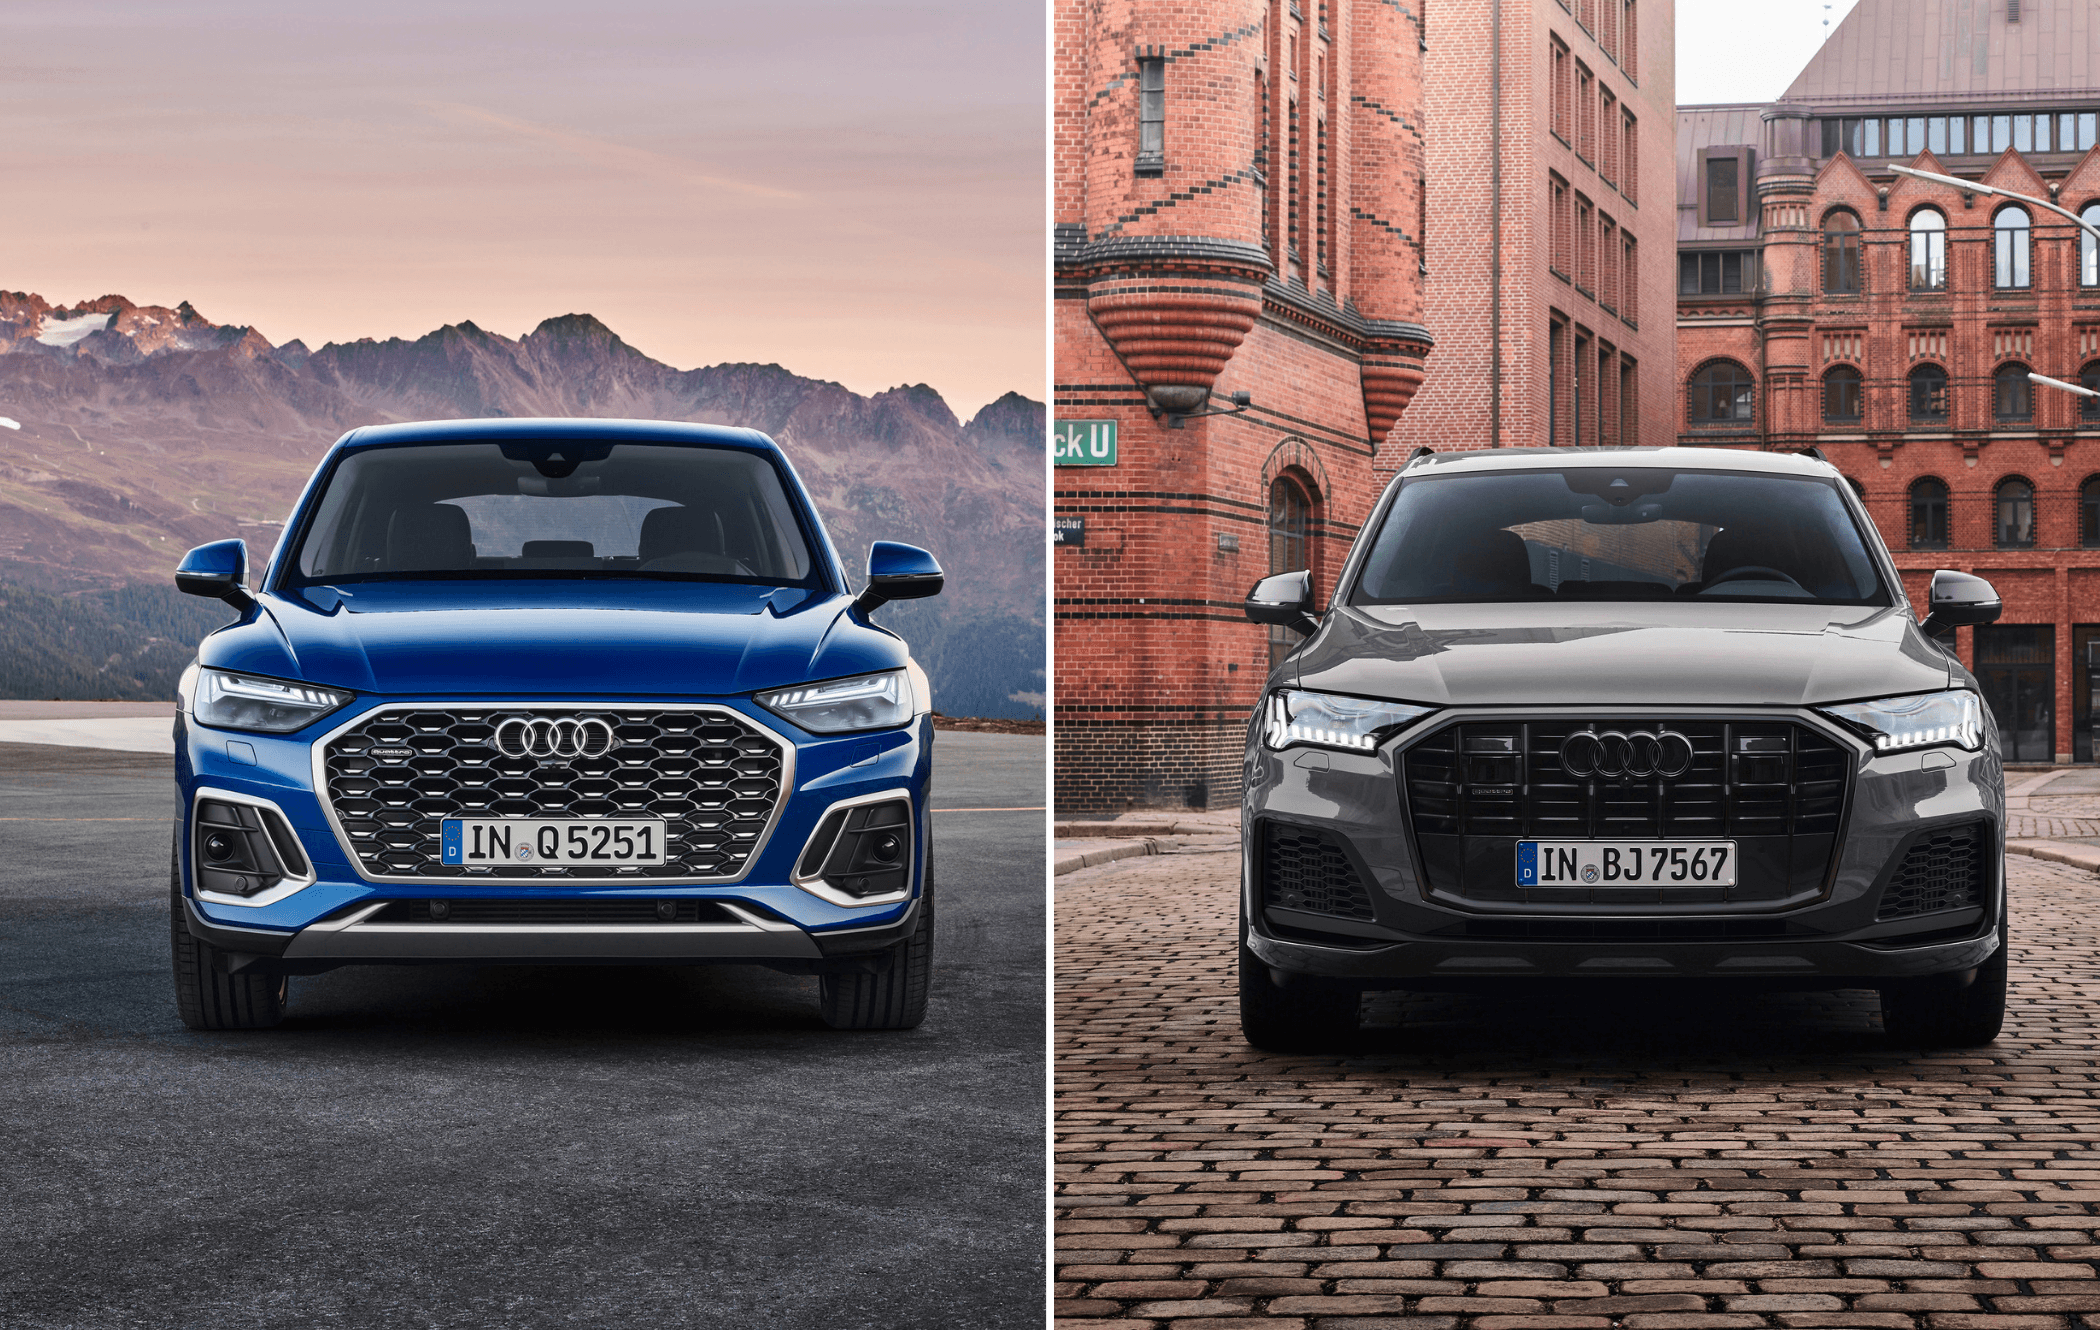 A comparison of the Audi Q5 and Audi A7 models from the front 